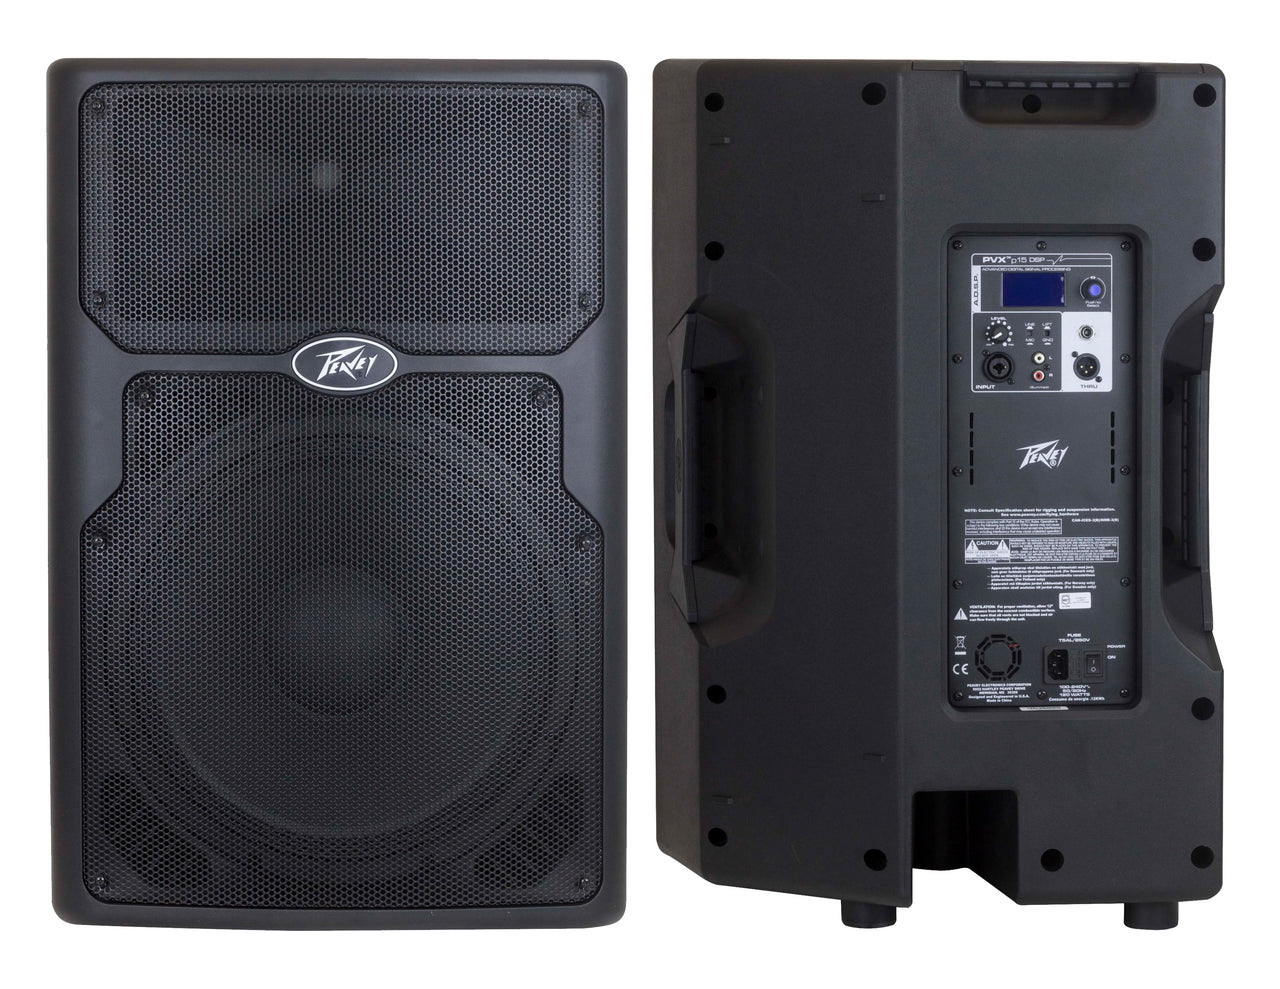 Peavey PVXP15 DSP 15 inch Powered Speaker 800W 15" Powered Speaker with 1.4" Compression Driver